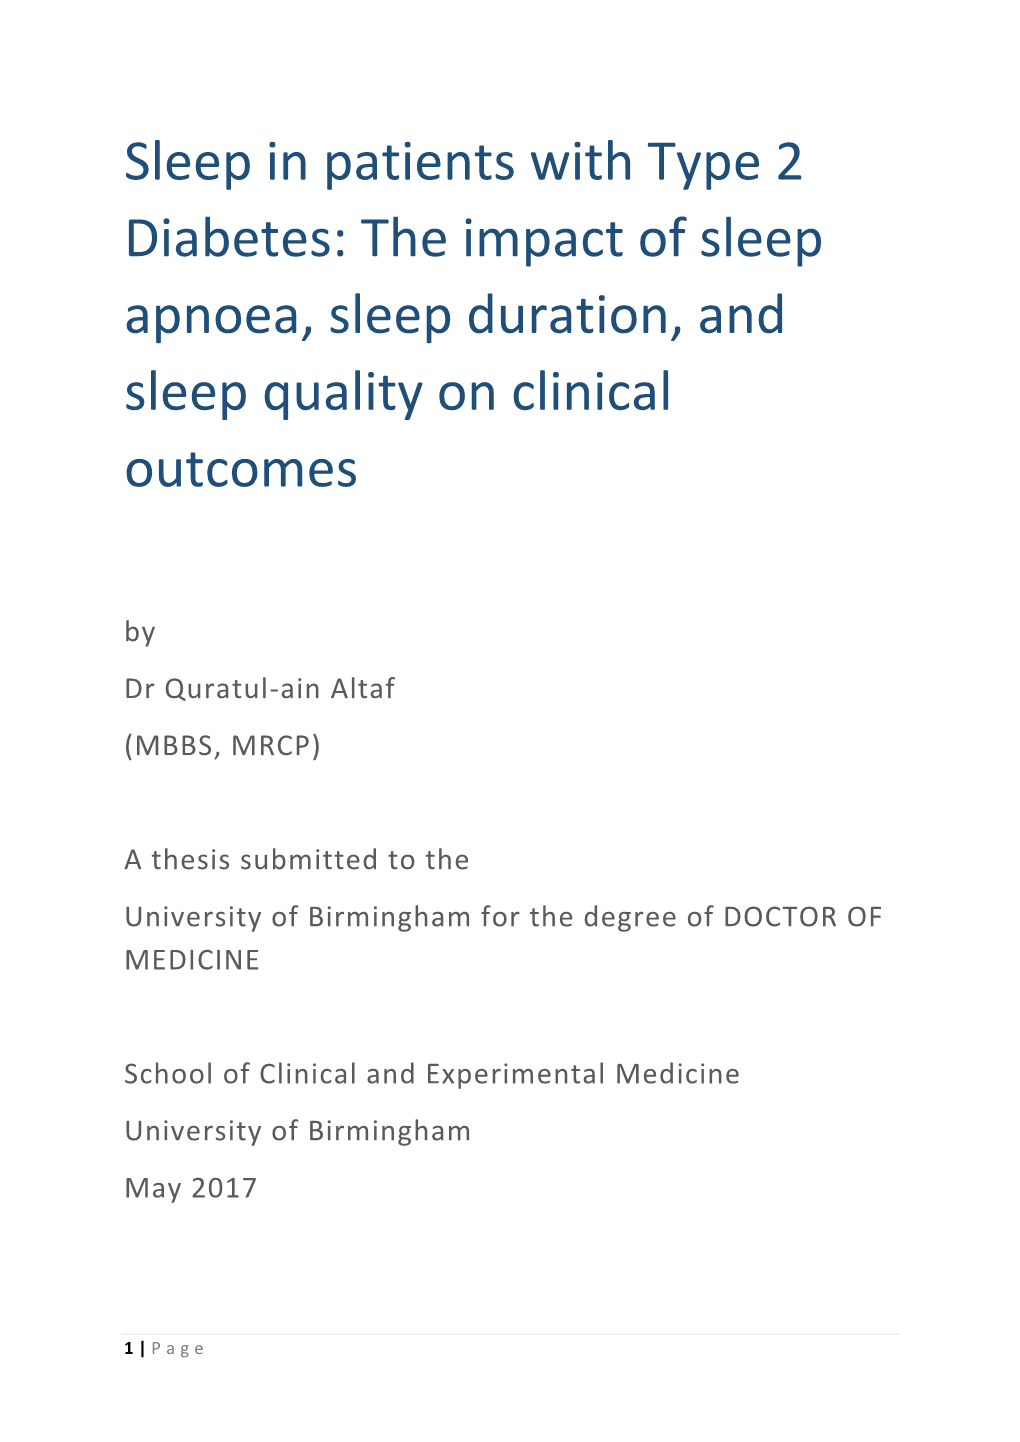 Sleep in Patients with Type 2 Diabetes: the Impact of Sleep Apnoea, Sleep Duration, and Sleep Quality on Clinical Outcomes by Dr Quratul-Ain Altaf (MBBS, MRCP)